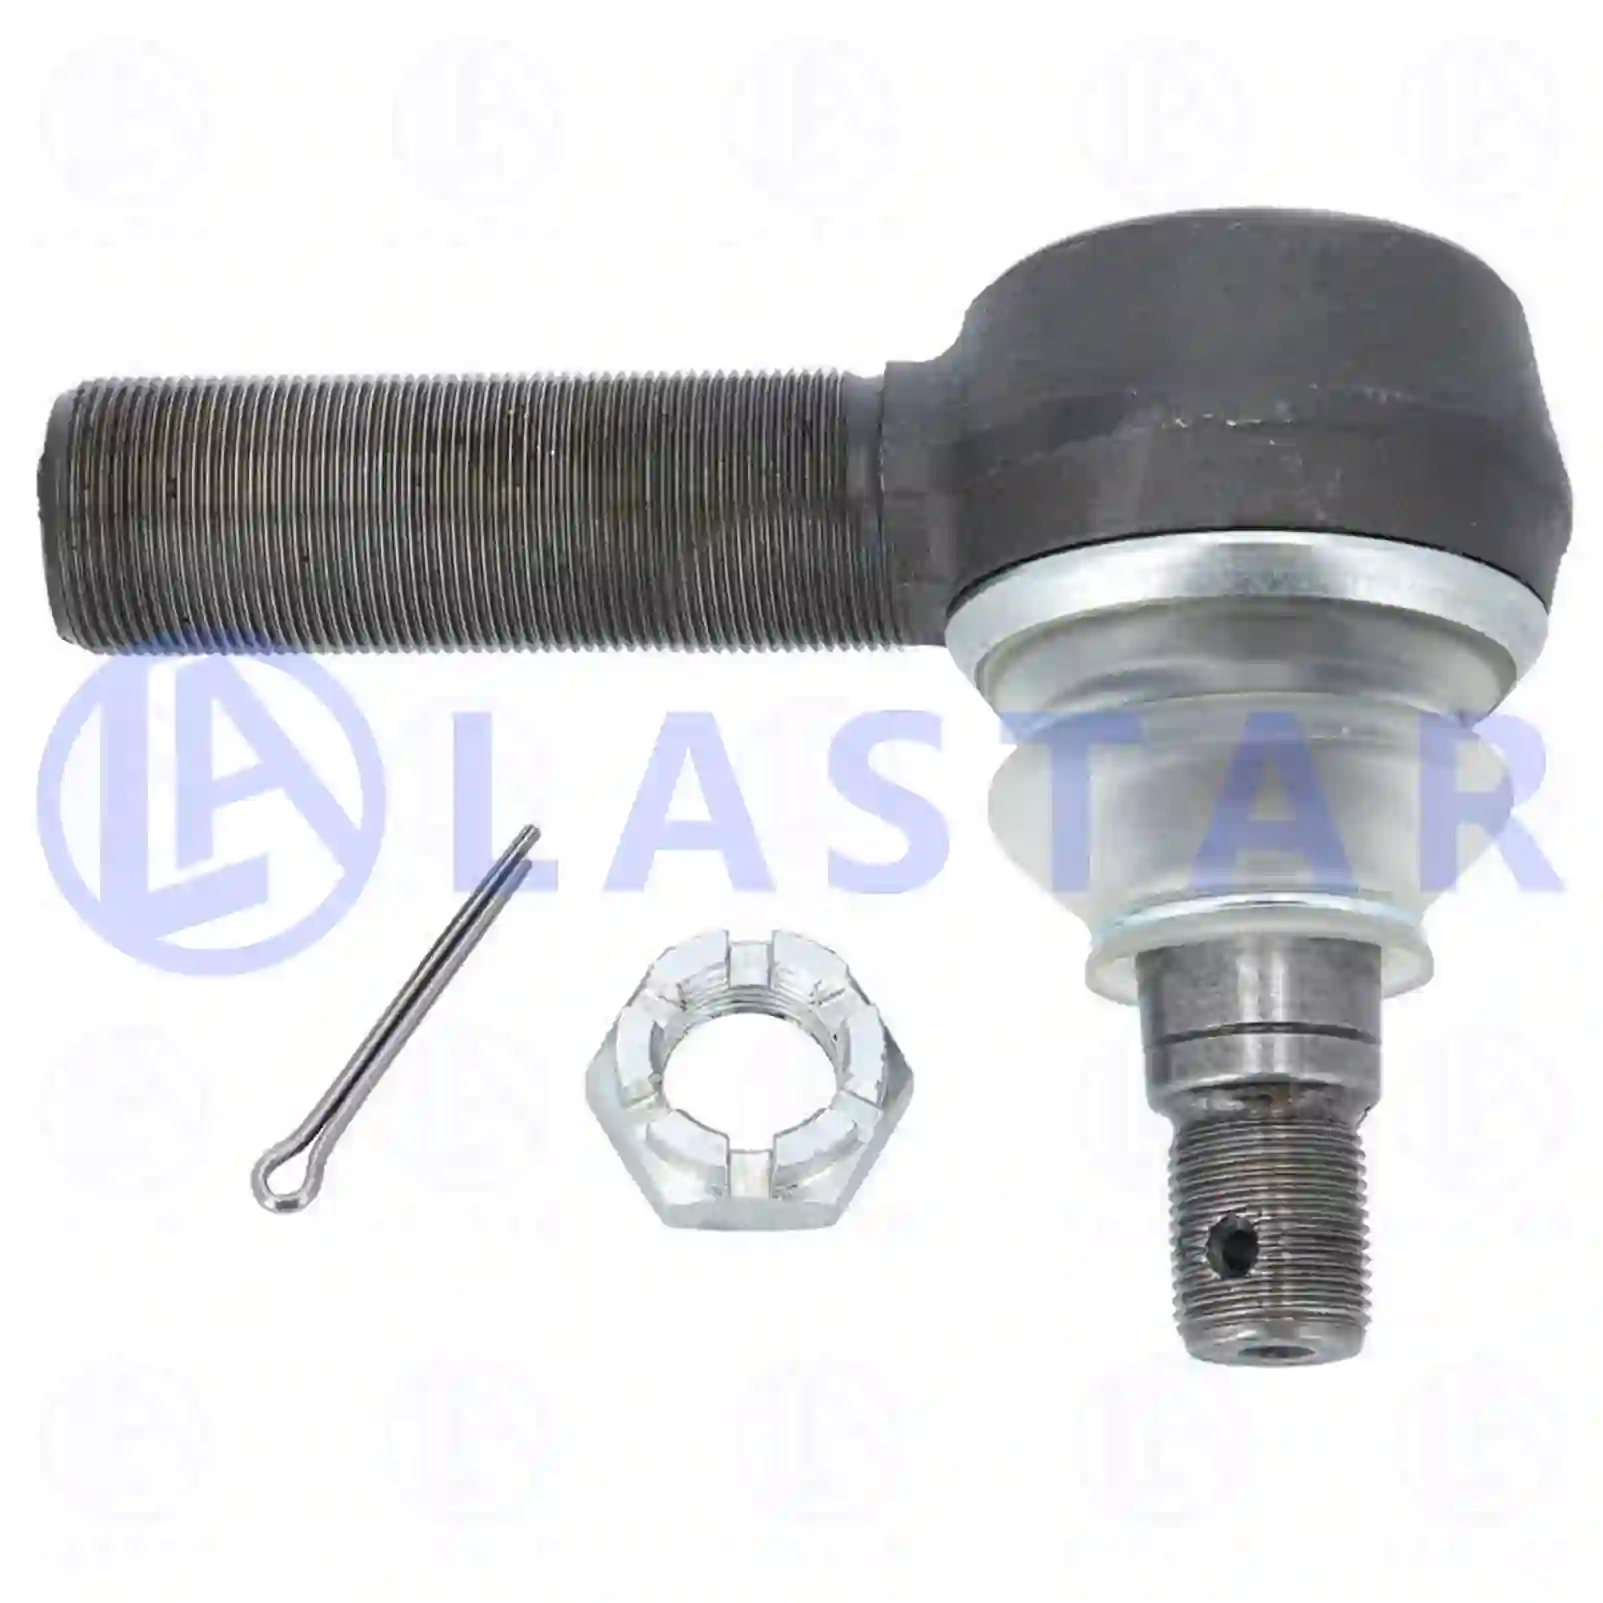 Drag Link Ball joint, right hand thread, la no: 77705368 ,  oem no:0069867, 0161376, 0608000, 1142173, 1326866, 161376, 608000, 69867, 02980875, 8408396, 99707030174, OG92293, 02980875, 2980875, 81953010025, 81953016151, 90804154117, 0004600148, 0004601848, 0004602648, 0004602748, 84053458, 5000295226, 5000808458, 7701002911, 6851447000, 6851478000, 6851486000, 6851488000, 6851523000, 6851533000, 6861486000, ZG40388-0008 Lastar Spare Part | Truck Spare Parts, Auotomotive Spare Parts